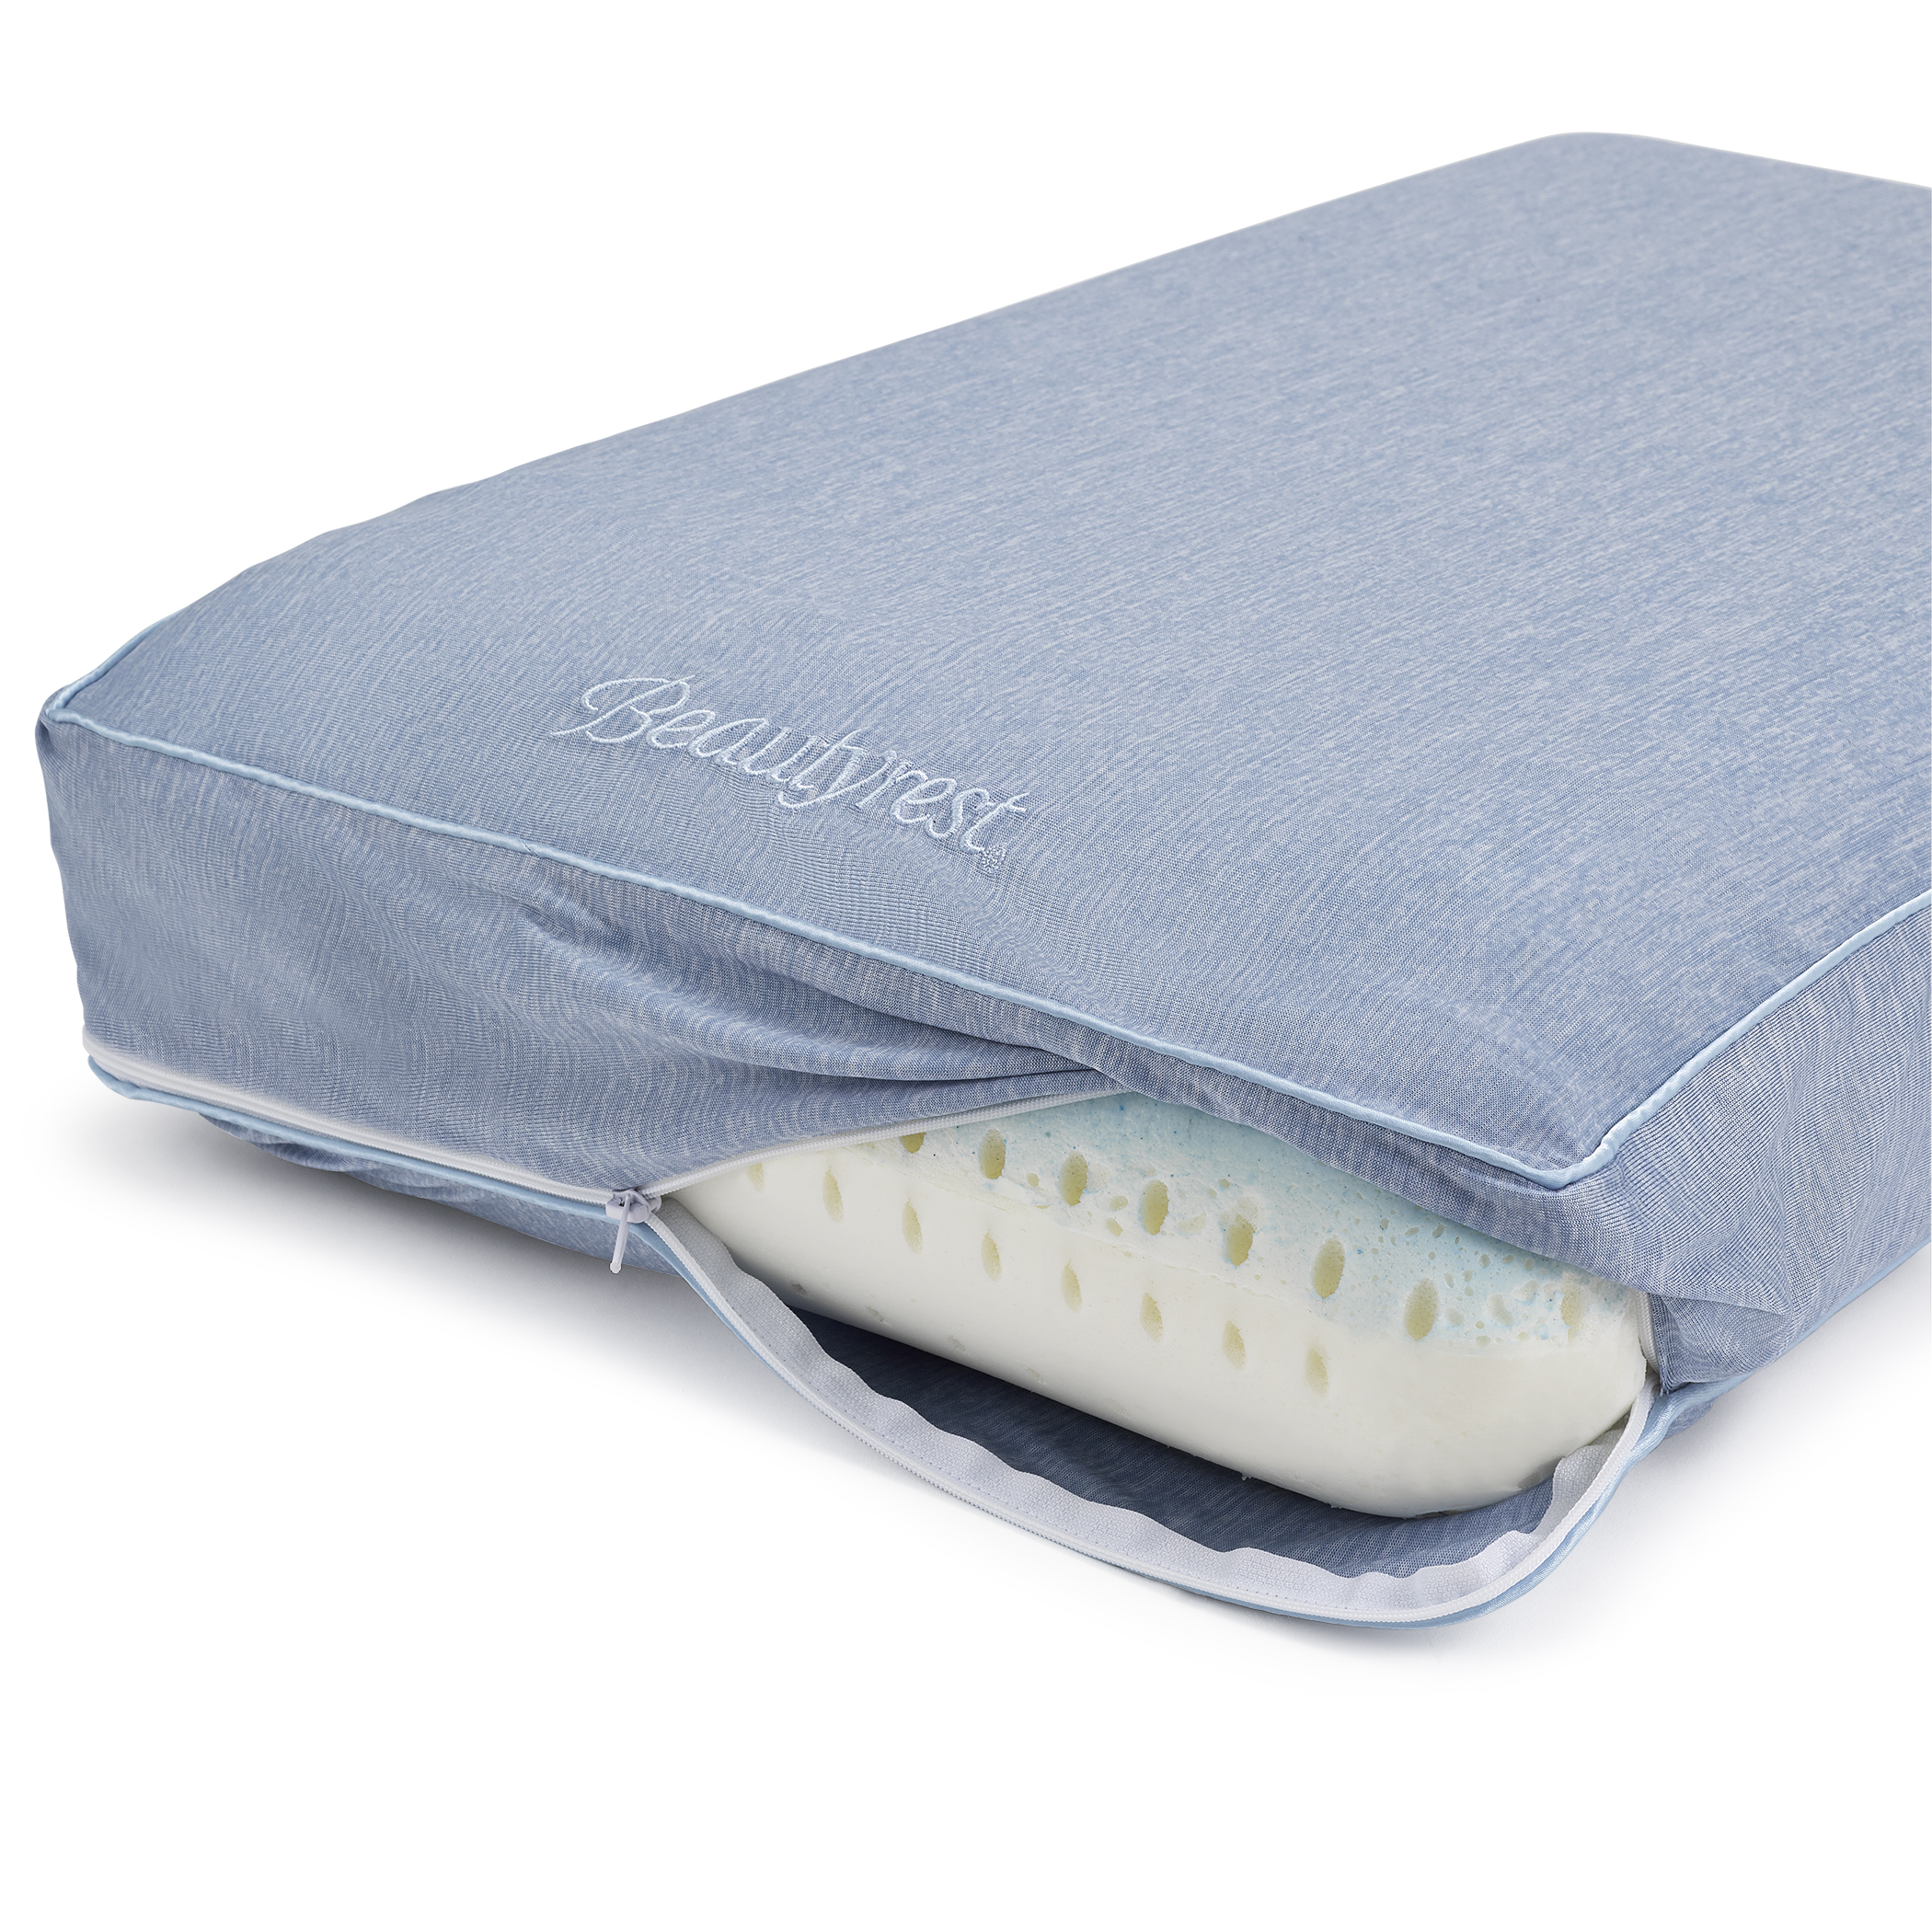 Beautyrest Silver Aquacool Memory Foam Pillow With Removable Cover, Standard/Queen - image 5 of 11